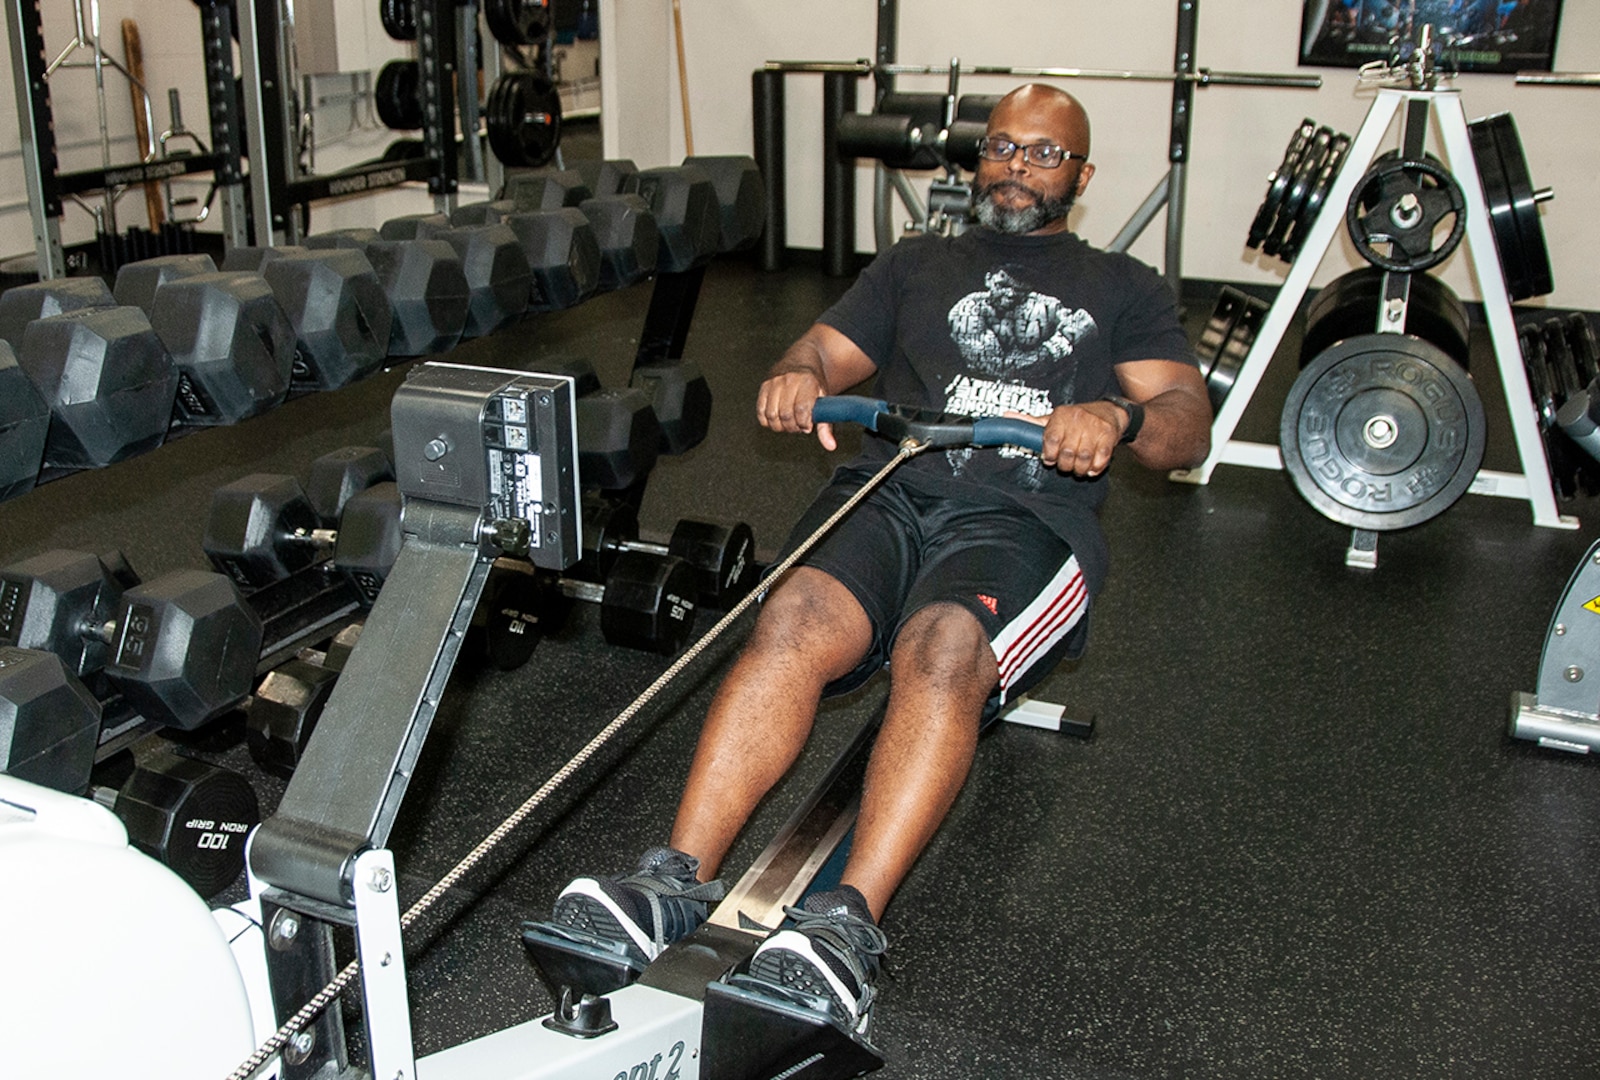 Tim Weatherspoon from DLA Energy relieves stress and improves his fitness on a rowing machine at the HQC Fitness Center. He took third place in the 500-meter and 1,000-meter rowing contest during the May Fitness Challenge May 14-17. Photo by Beth Reece